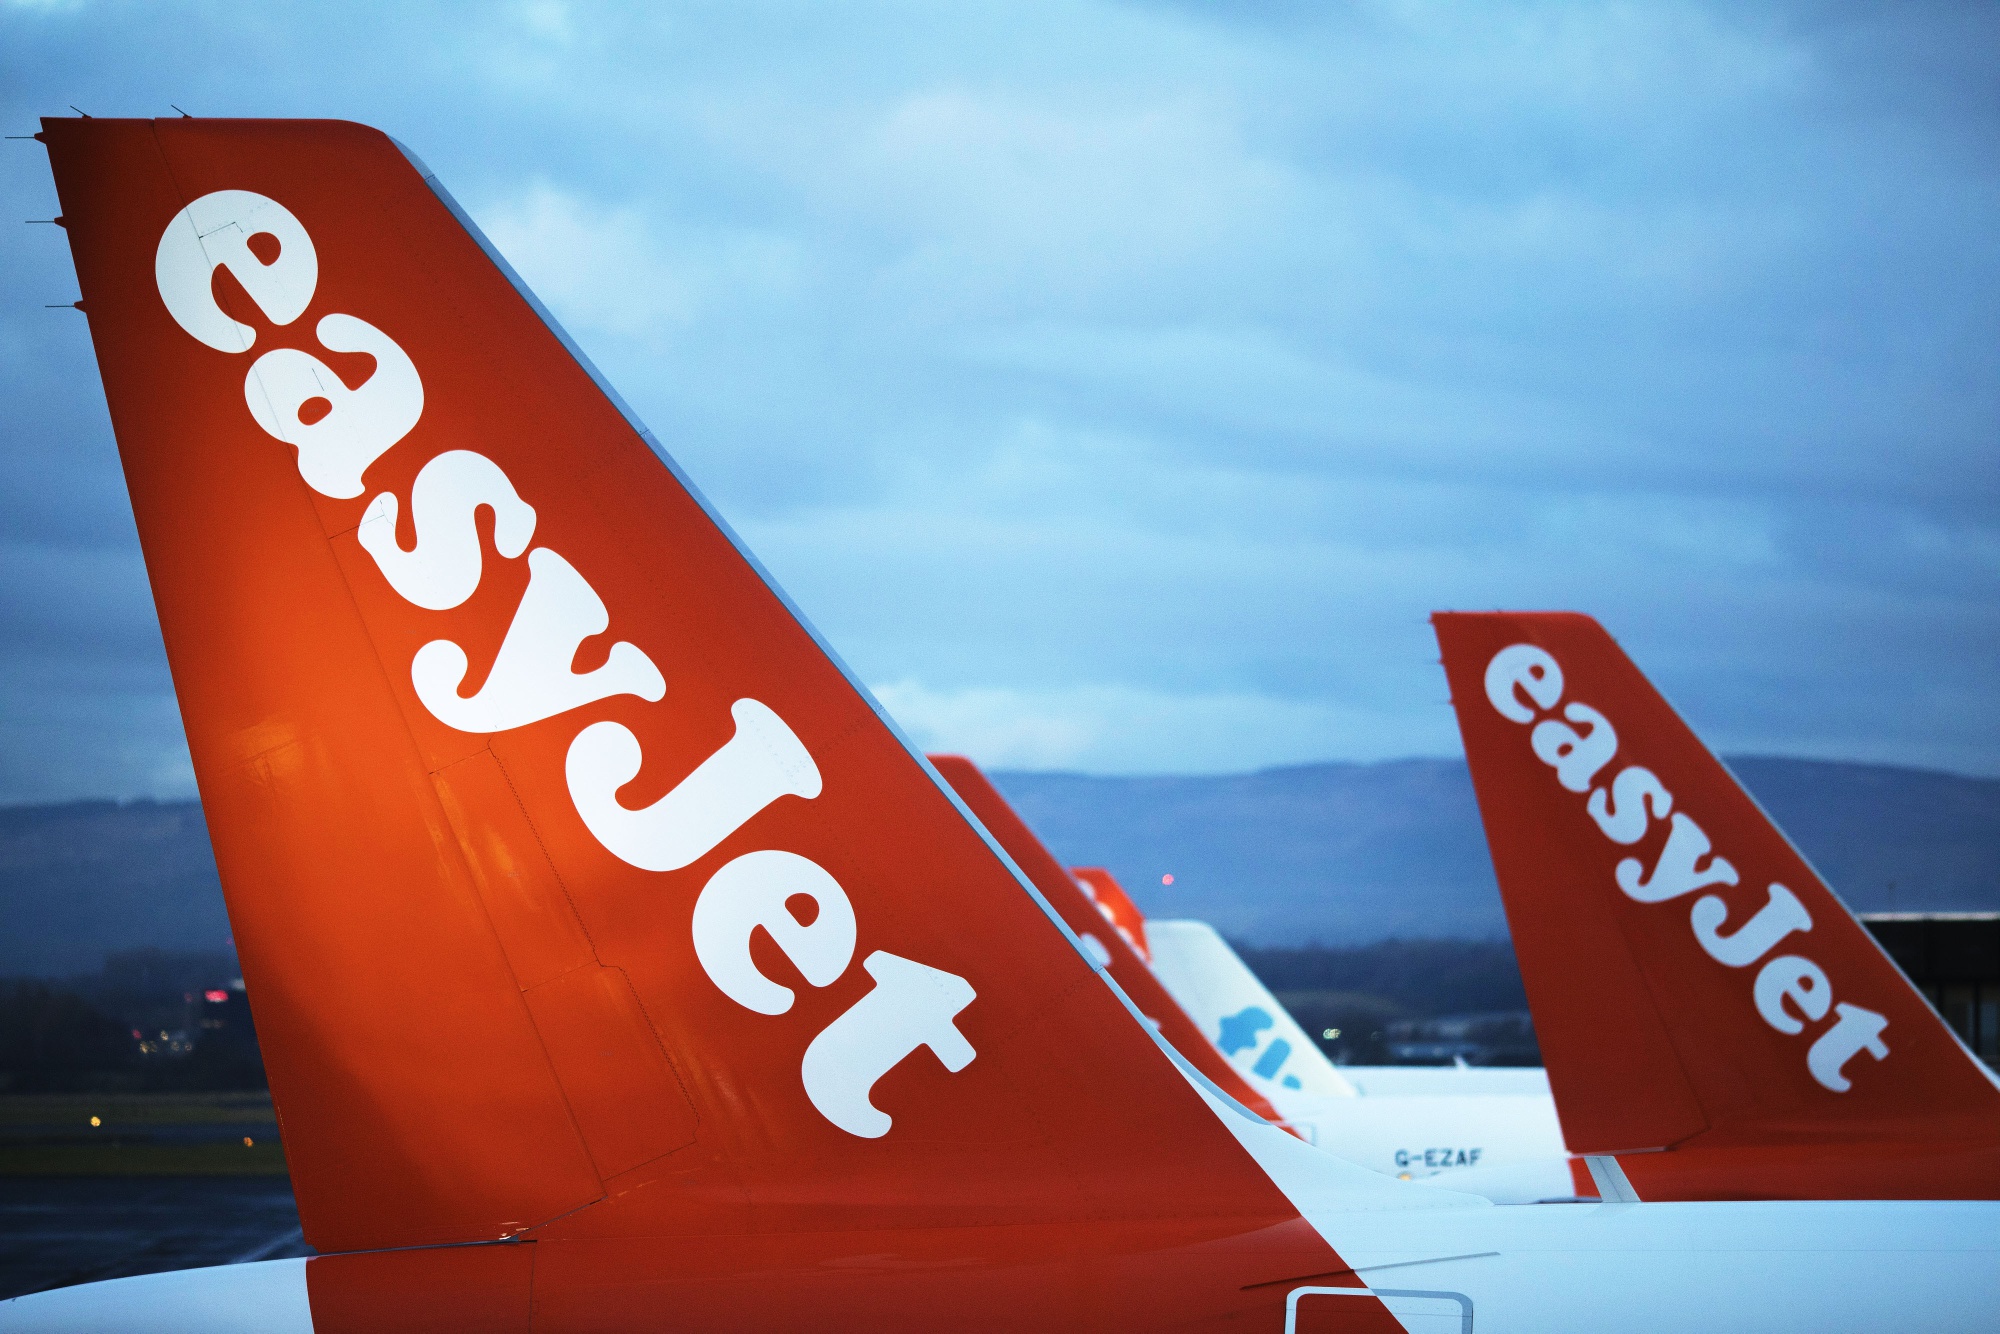 Easyjet Plc Aircraft as European Airlines Hone Response to Emissions Onslaught